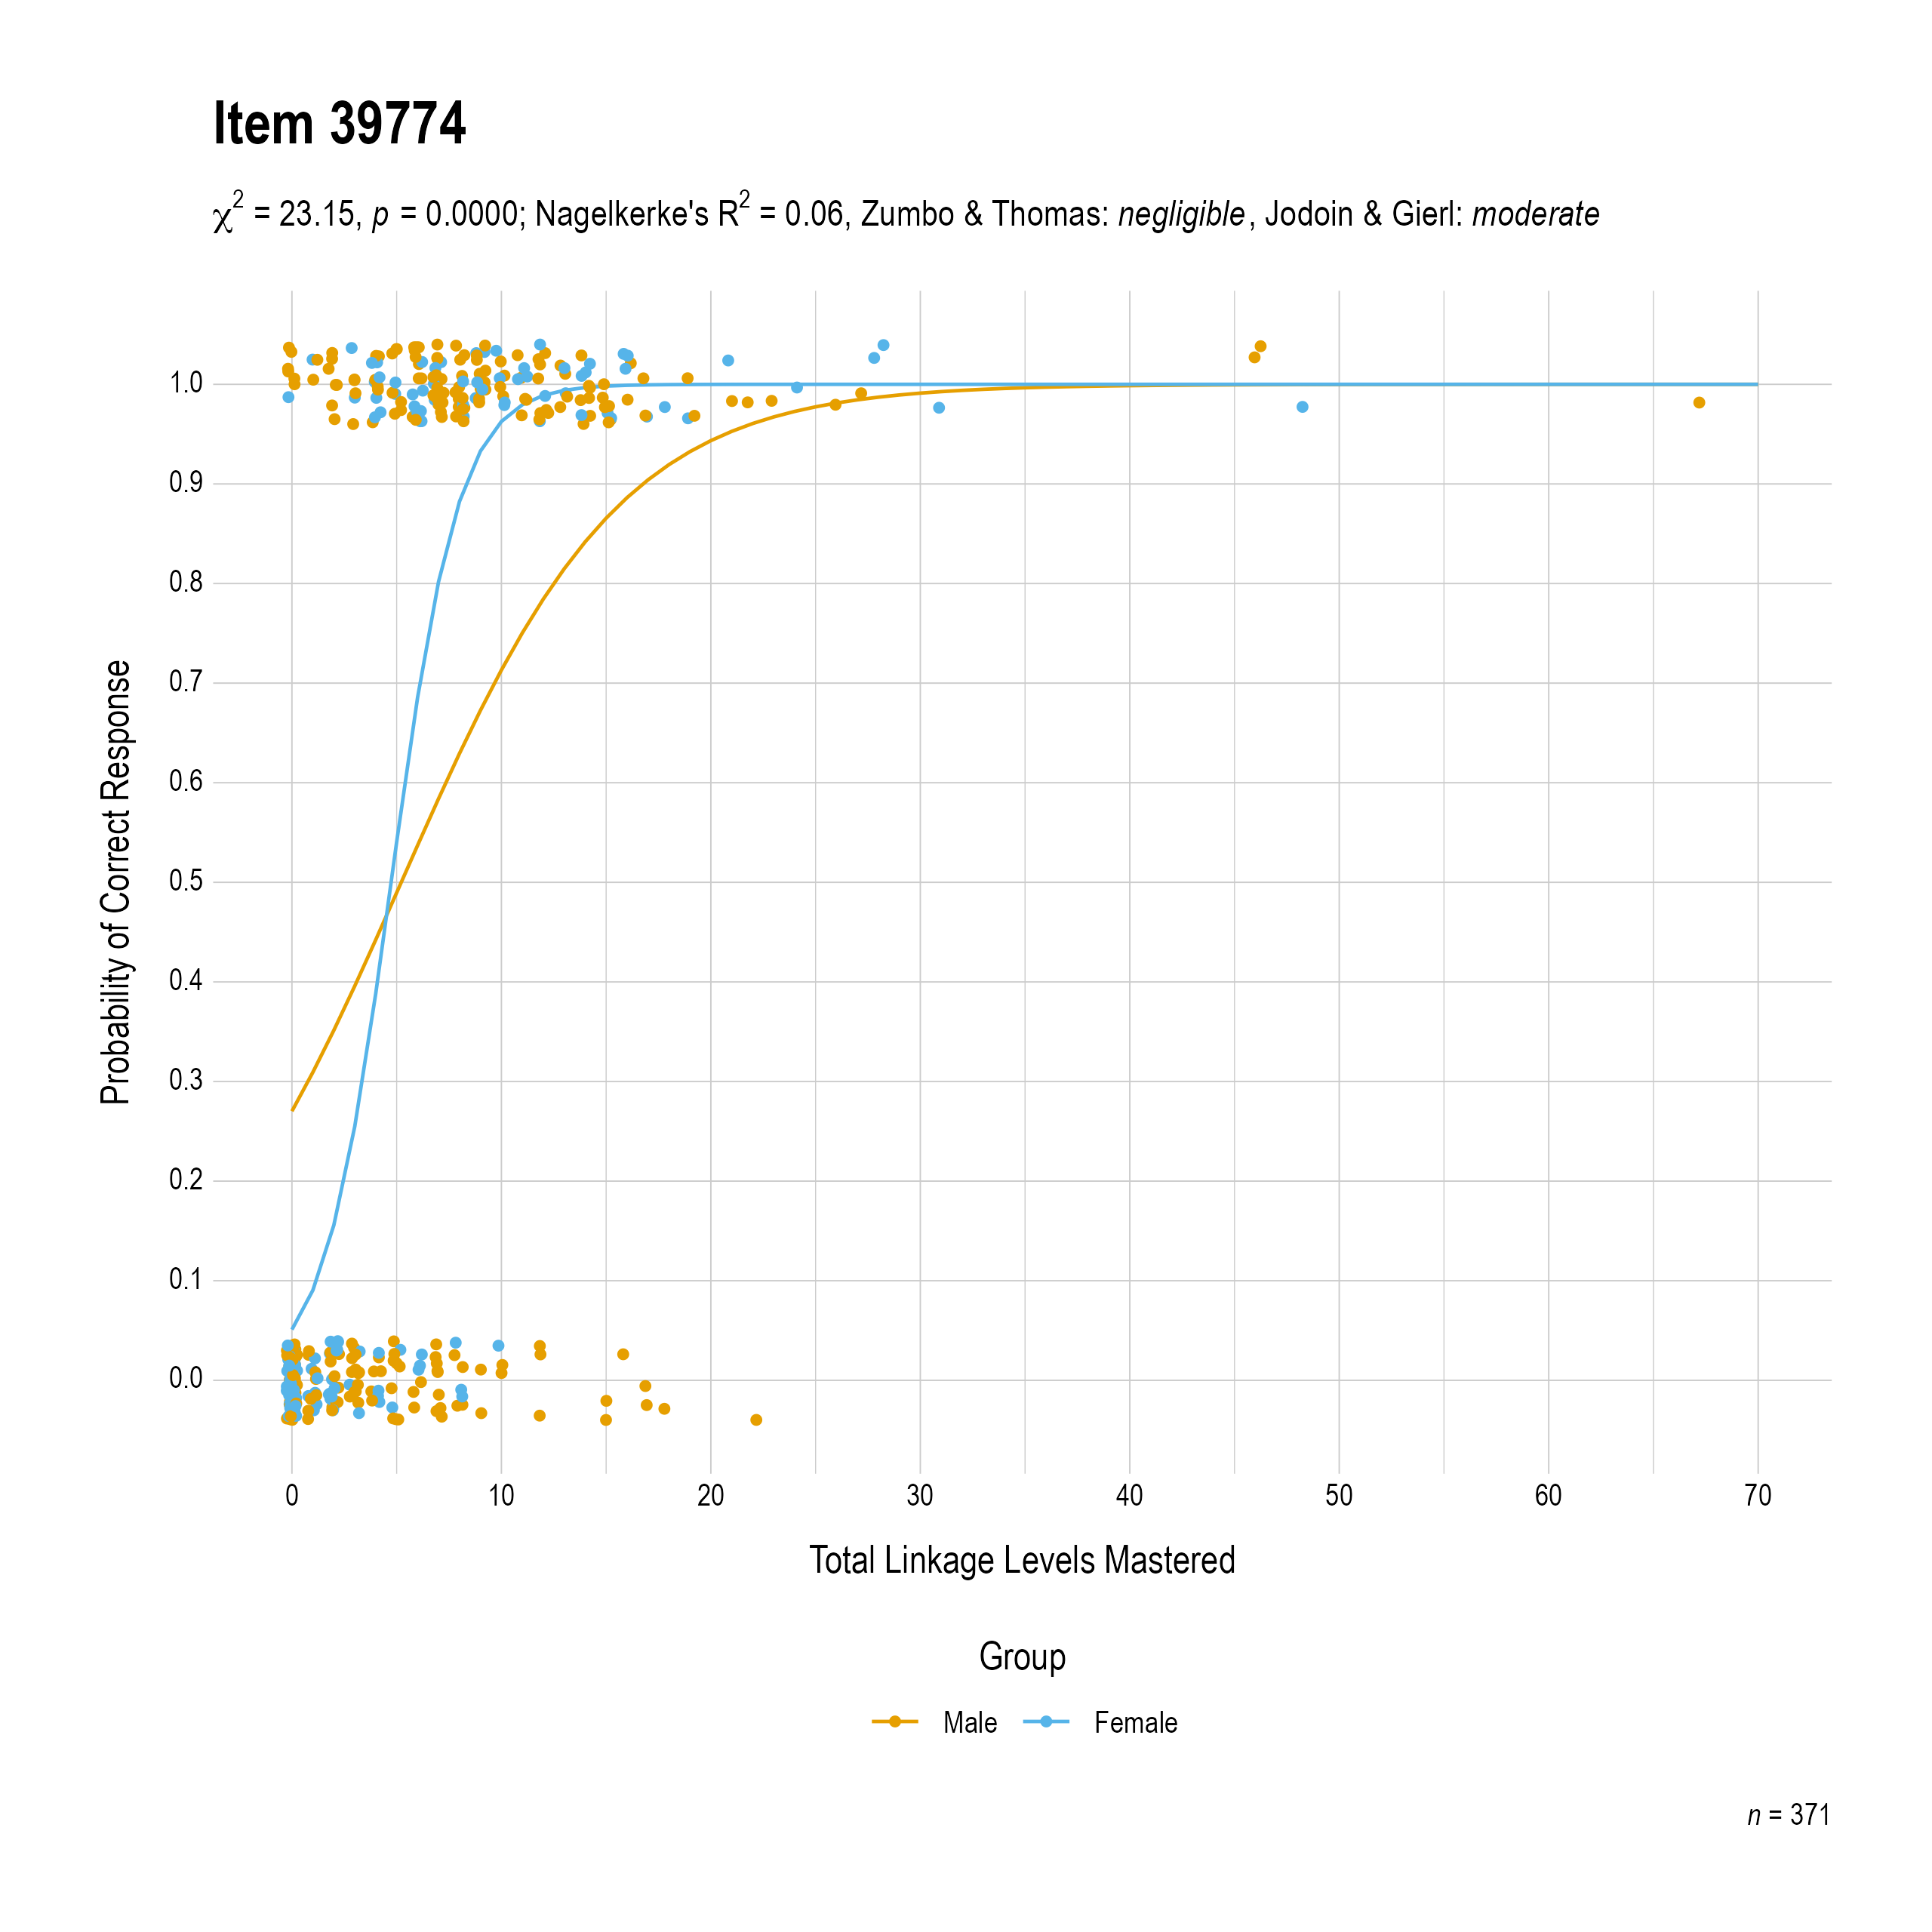 The plot of the combined gender differential item function evidence for English language arts item 39774. The figure contains points shaded by group. The figure also contains a logistic regression curve for each group. The total linkage levels mastered in is on the x-axis, and the probability of a correct response is on the y-axis.